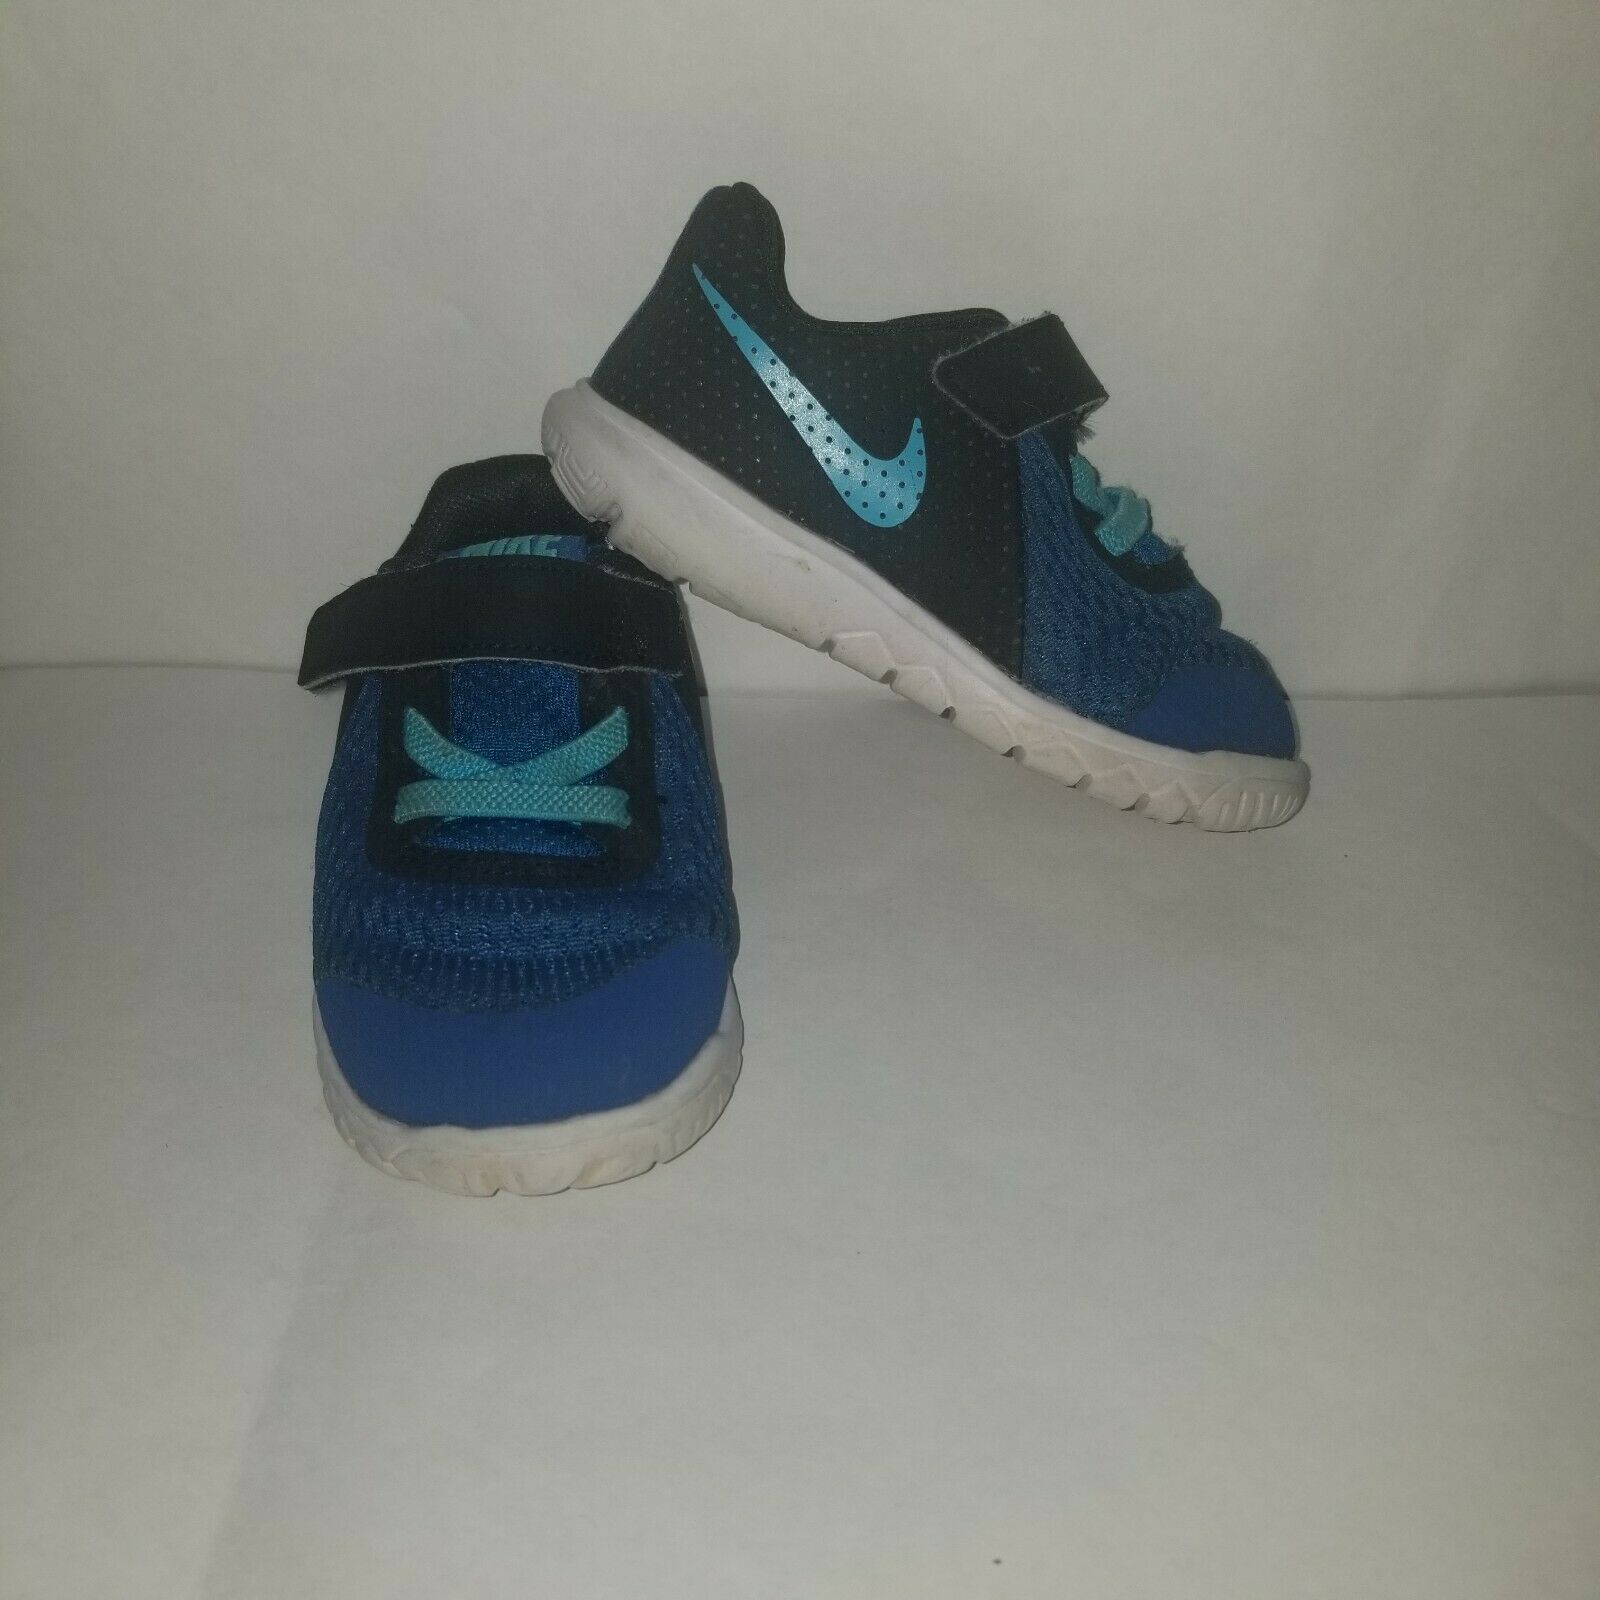 Nike Flex Experience RN 5 Toddler Boys Sneakers Shoes Blue Size 6C